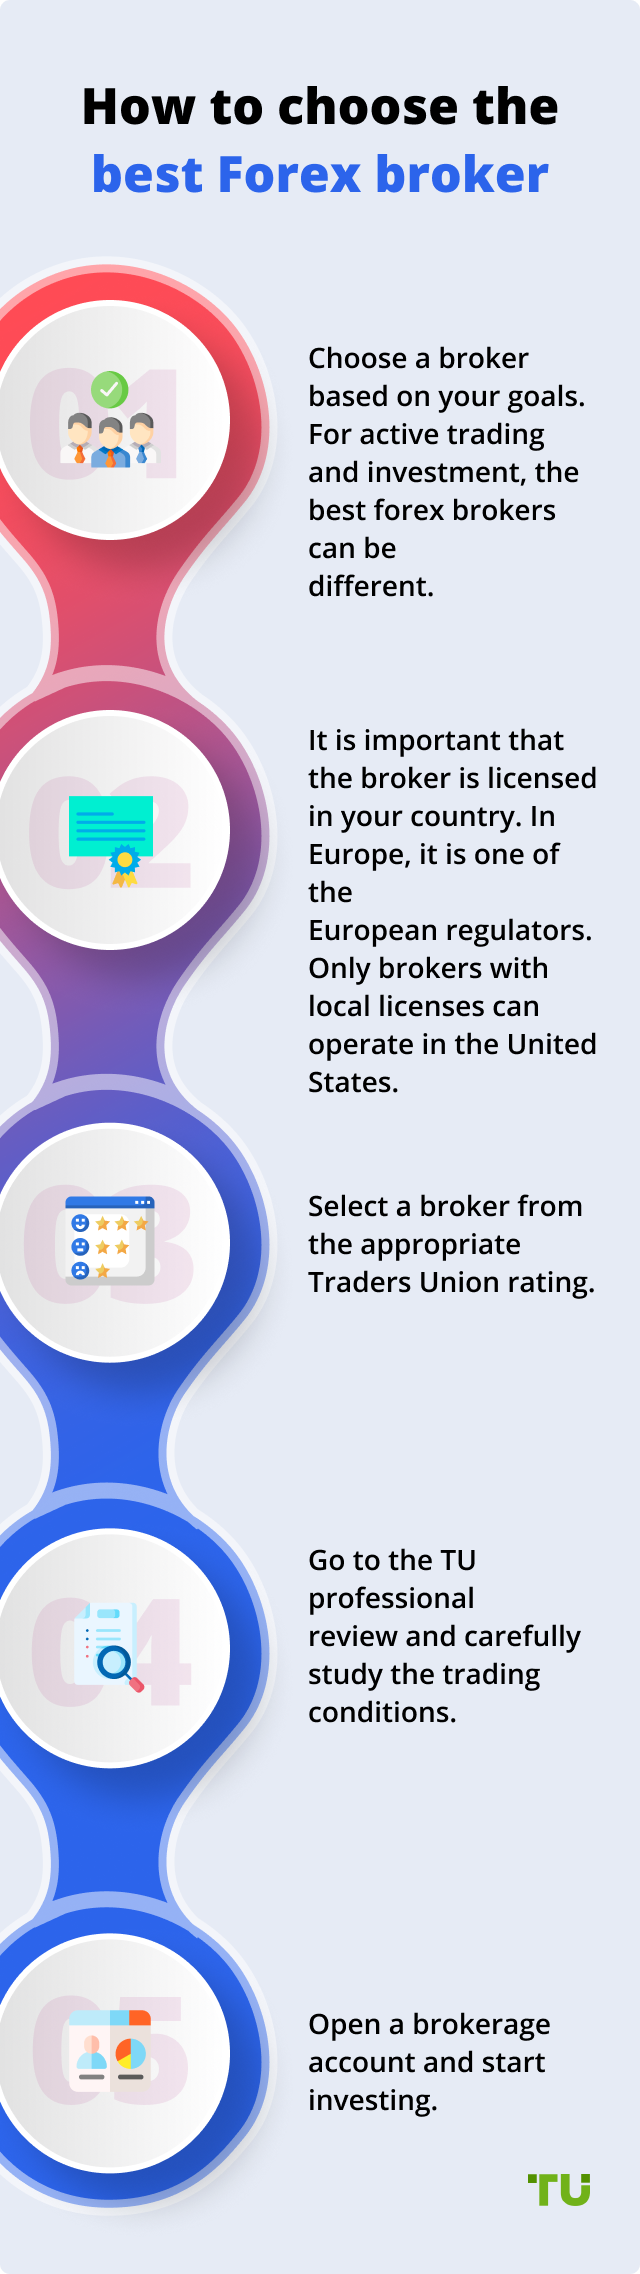 List of forex brokers regulated by fsa portal how to buy bitcoins safely remove